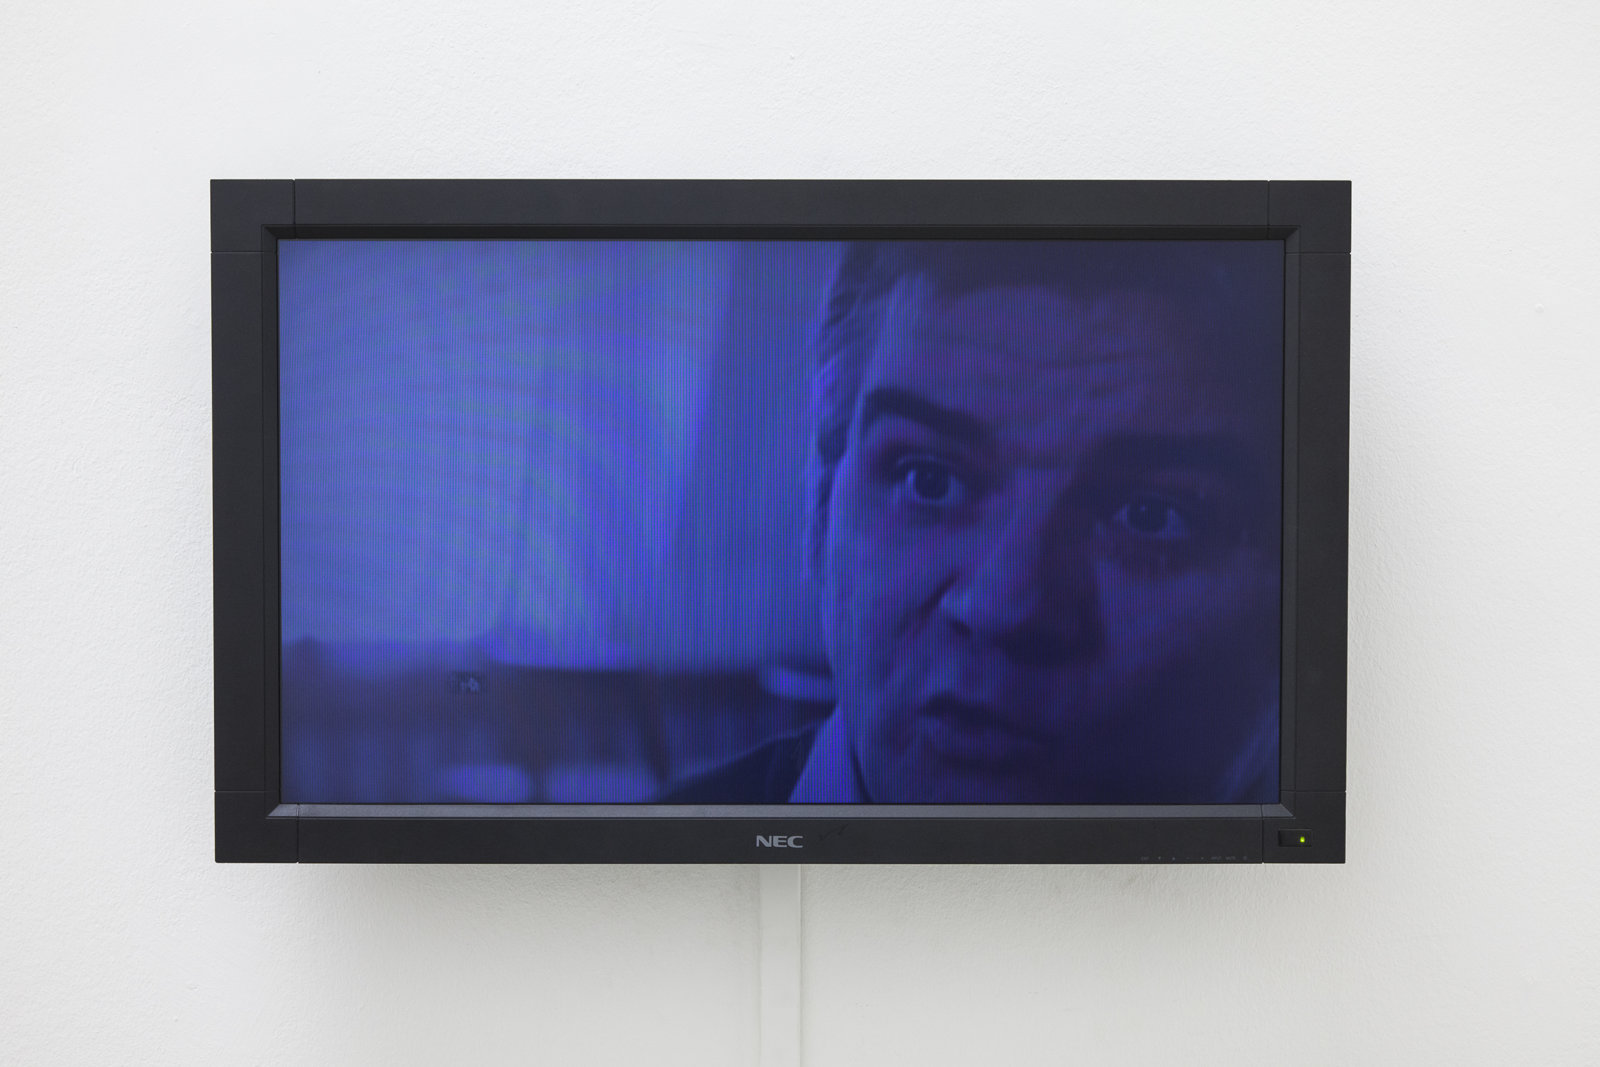 Judy Radul, A CONTAINER CONTAINING NOT ONE TV (detail), 2013, powder coated steel, CRT television, 2 flatscreen televisions, local television signal, remote control, two live video cameras, maxmsp patch, dimensions variable. Installation view, This	is	Television,	Daadgalerie,	Berlin,	Germany, 2013